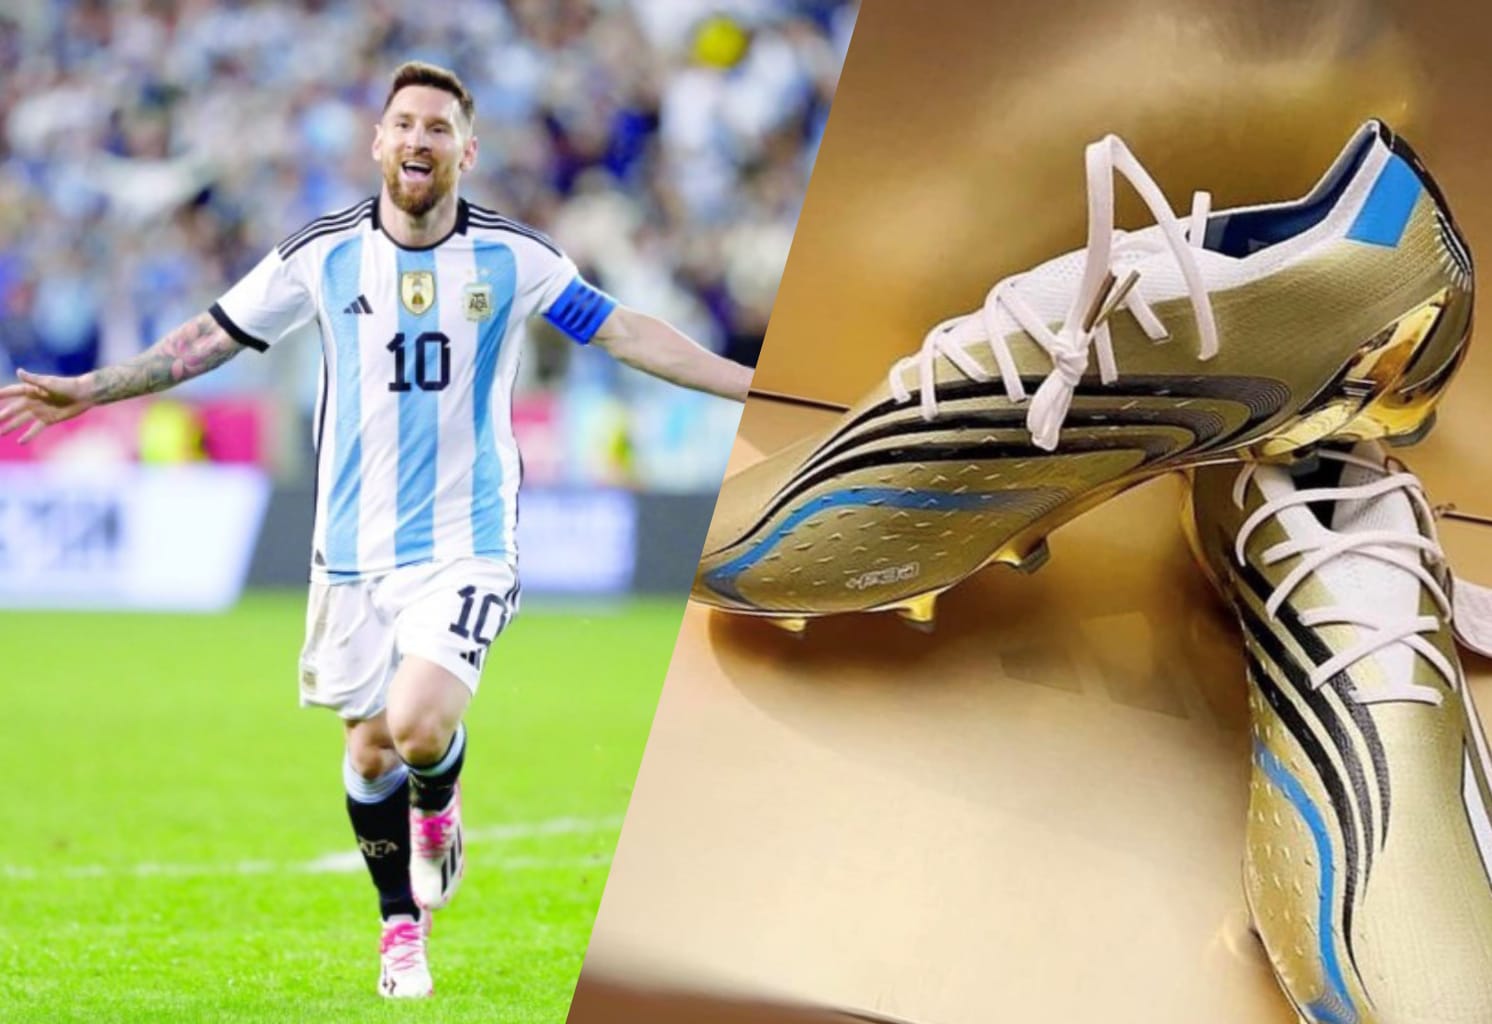 Lionel Messi's World Boots: Lionel Messi's boots from Adidas for upcoming FIFA World revealed